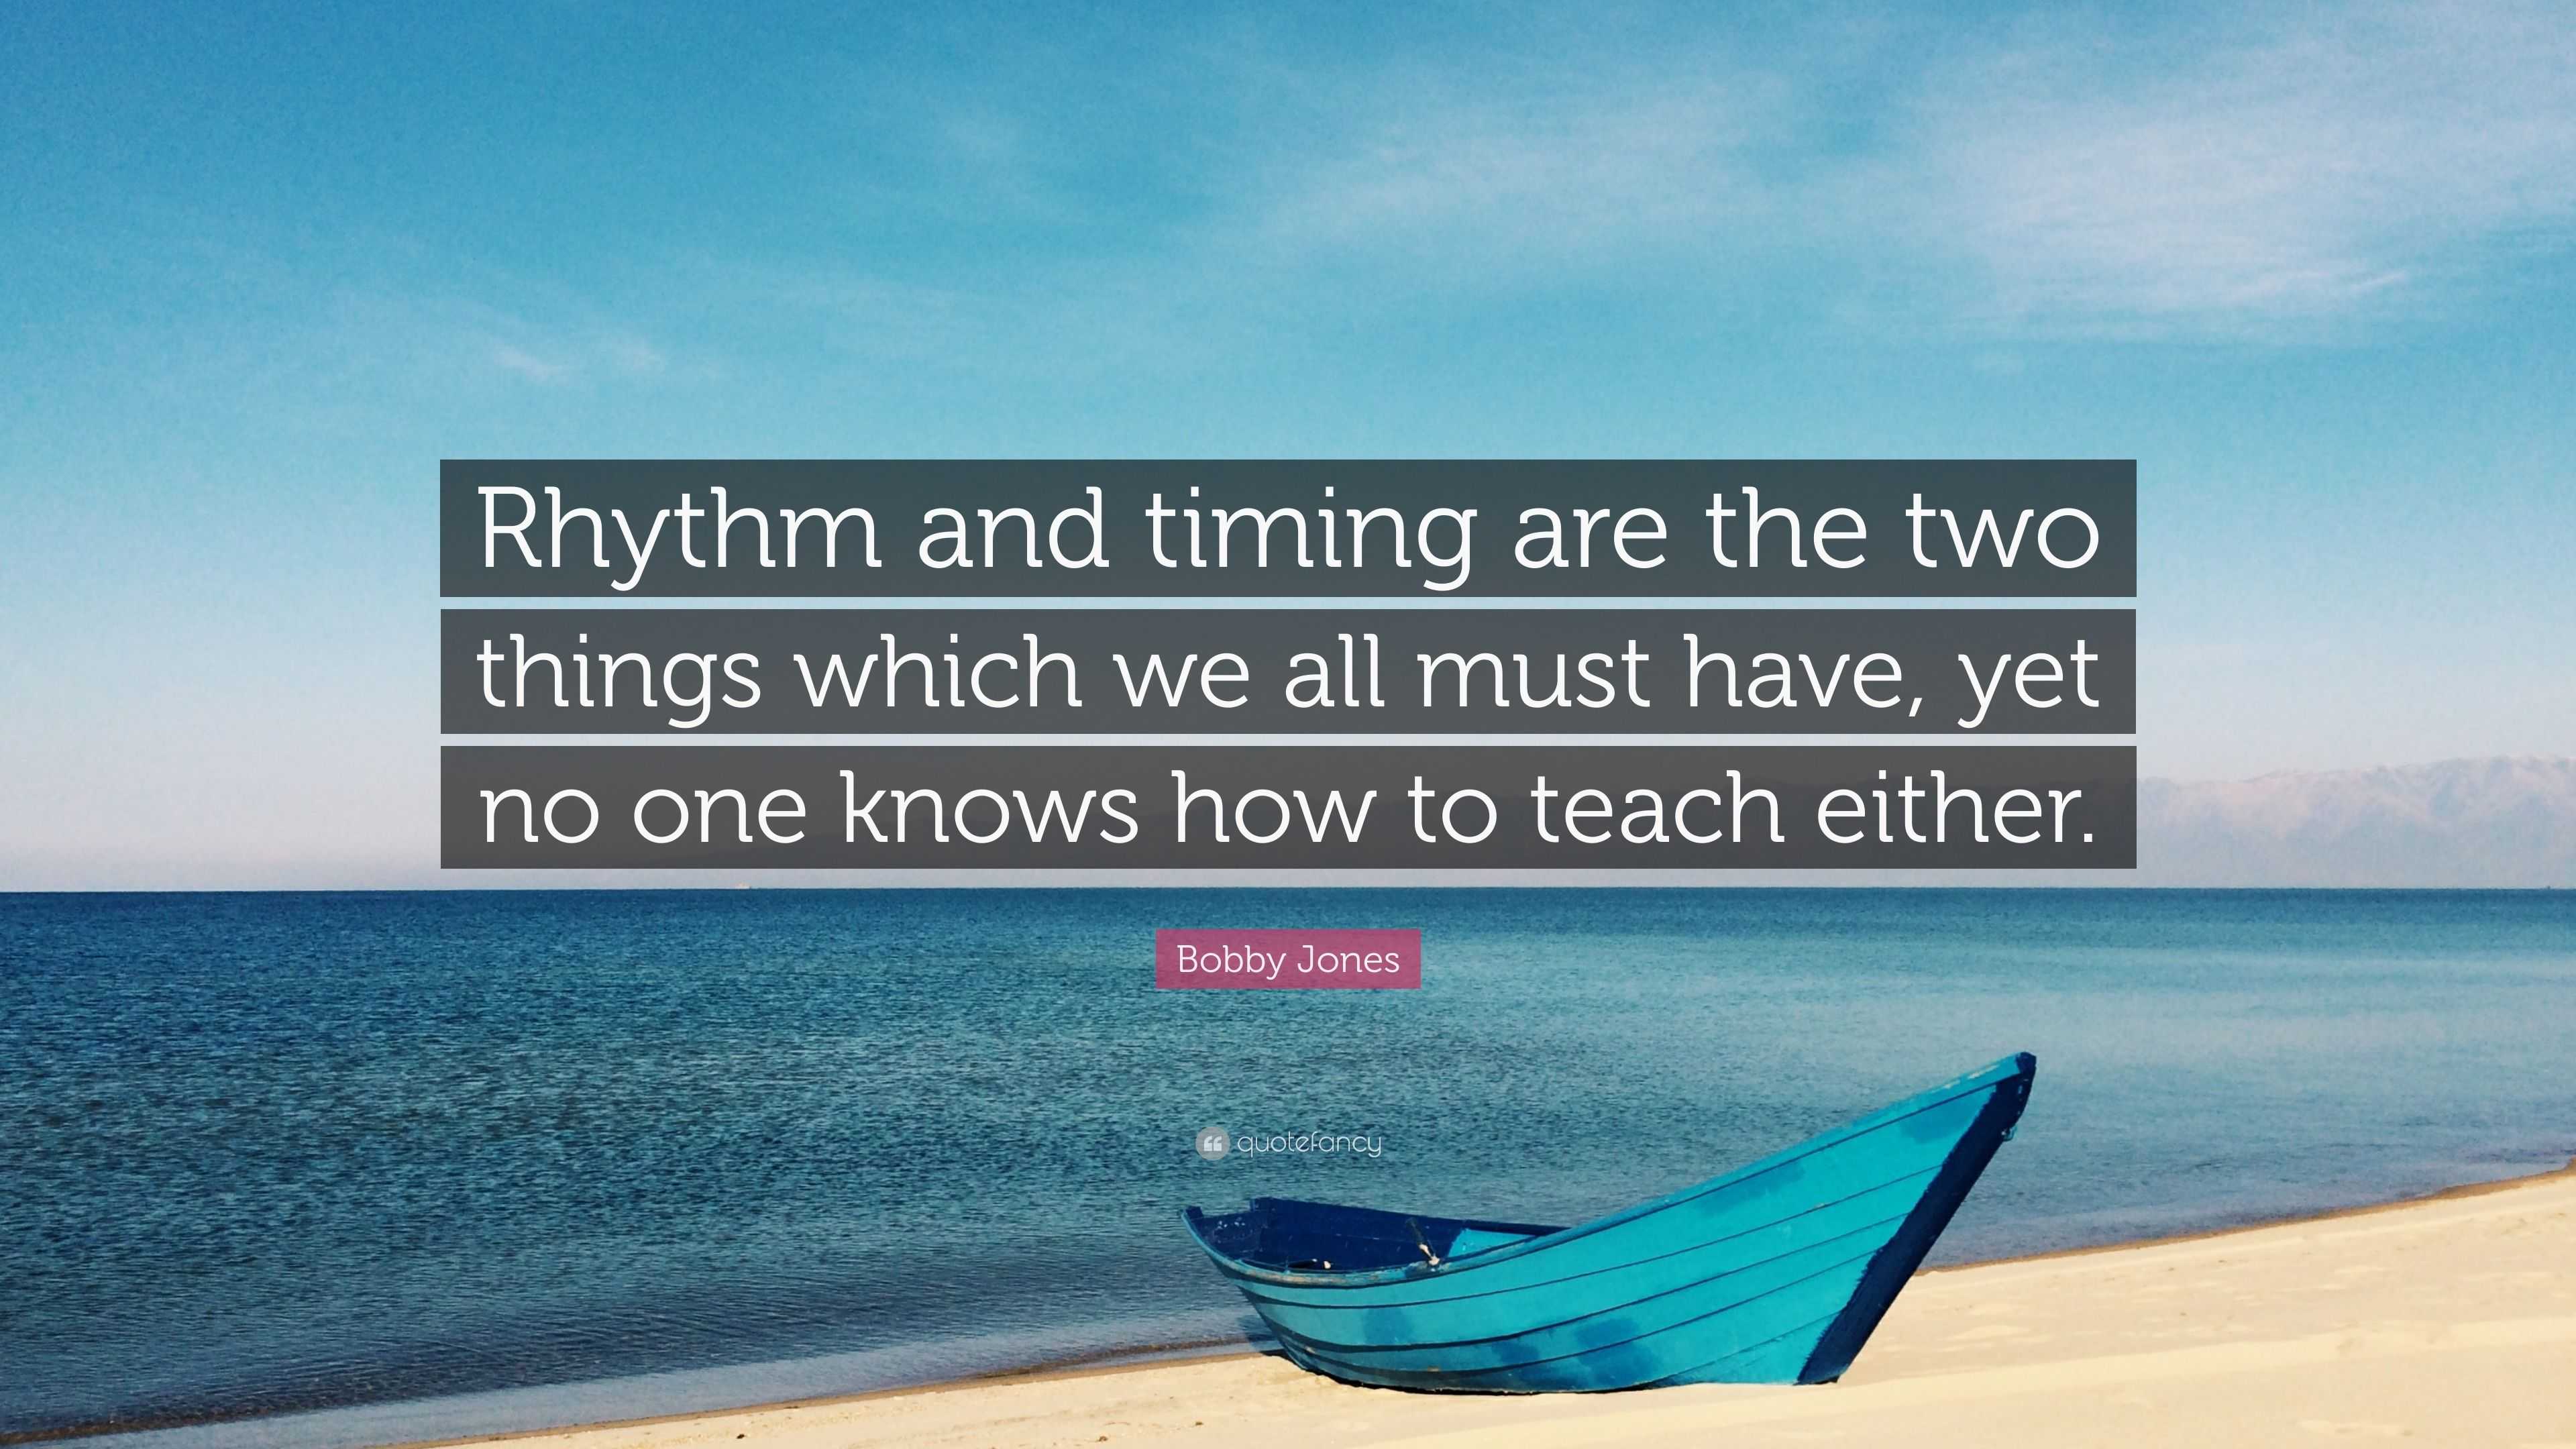 Bobby Jones Quote: “Rhythm and timing are the two things which we all must  have, yet